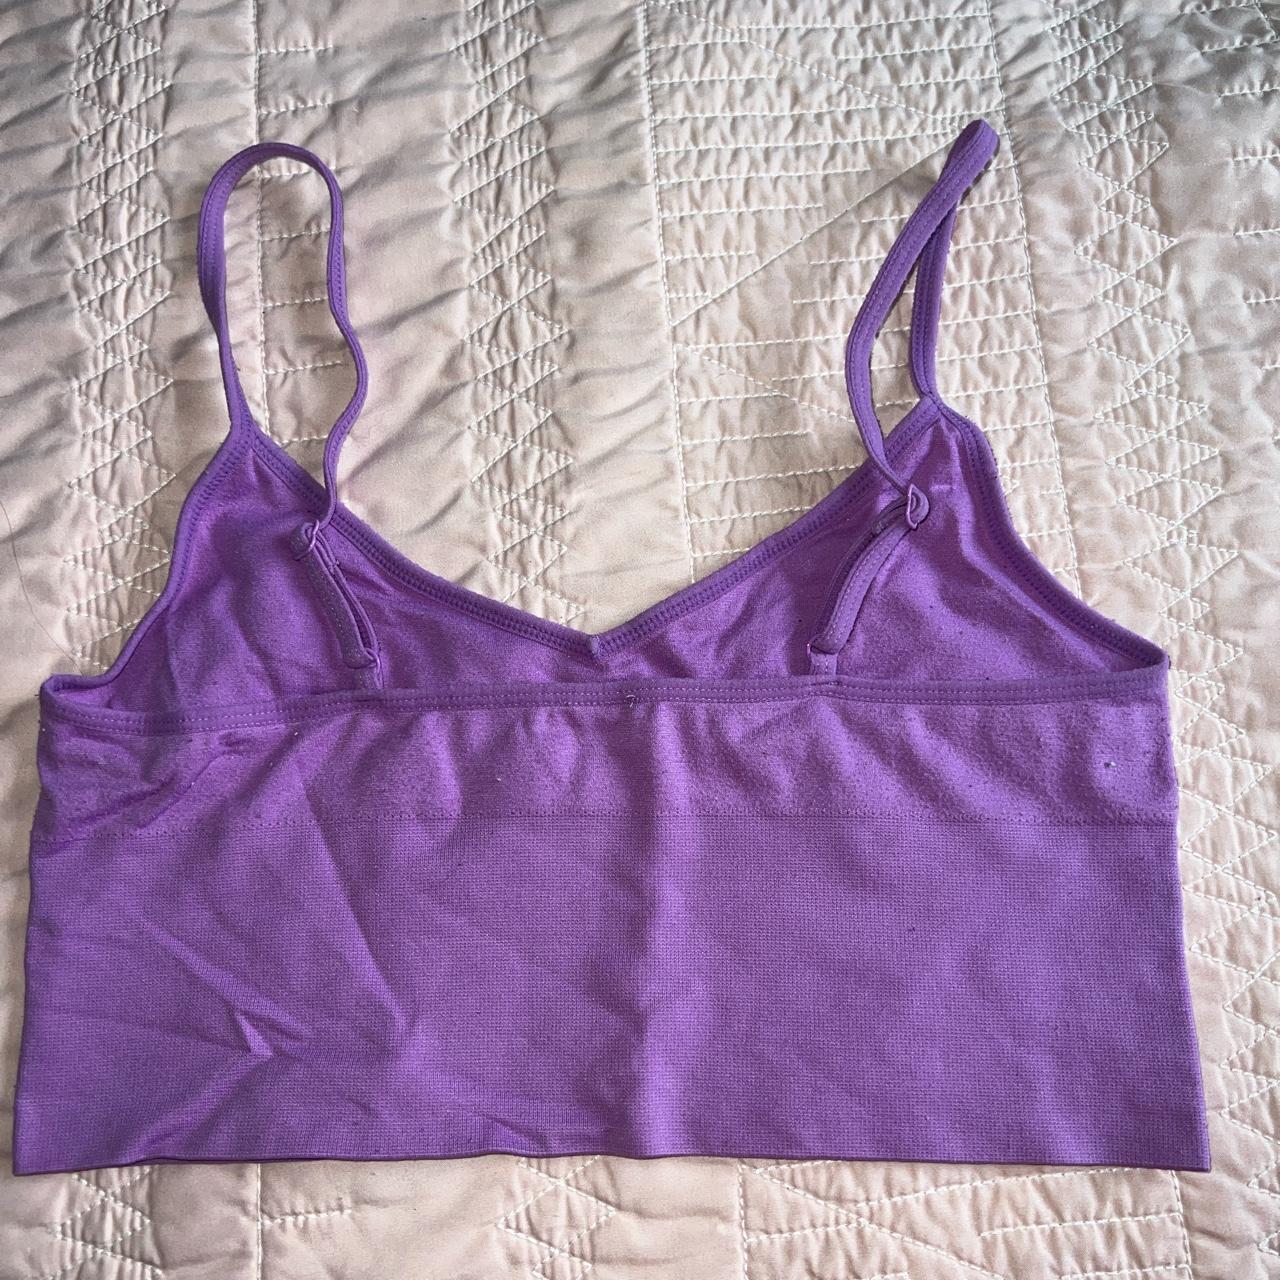 Small cropped purple shirt, selling bc too small on me - Depop